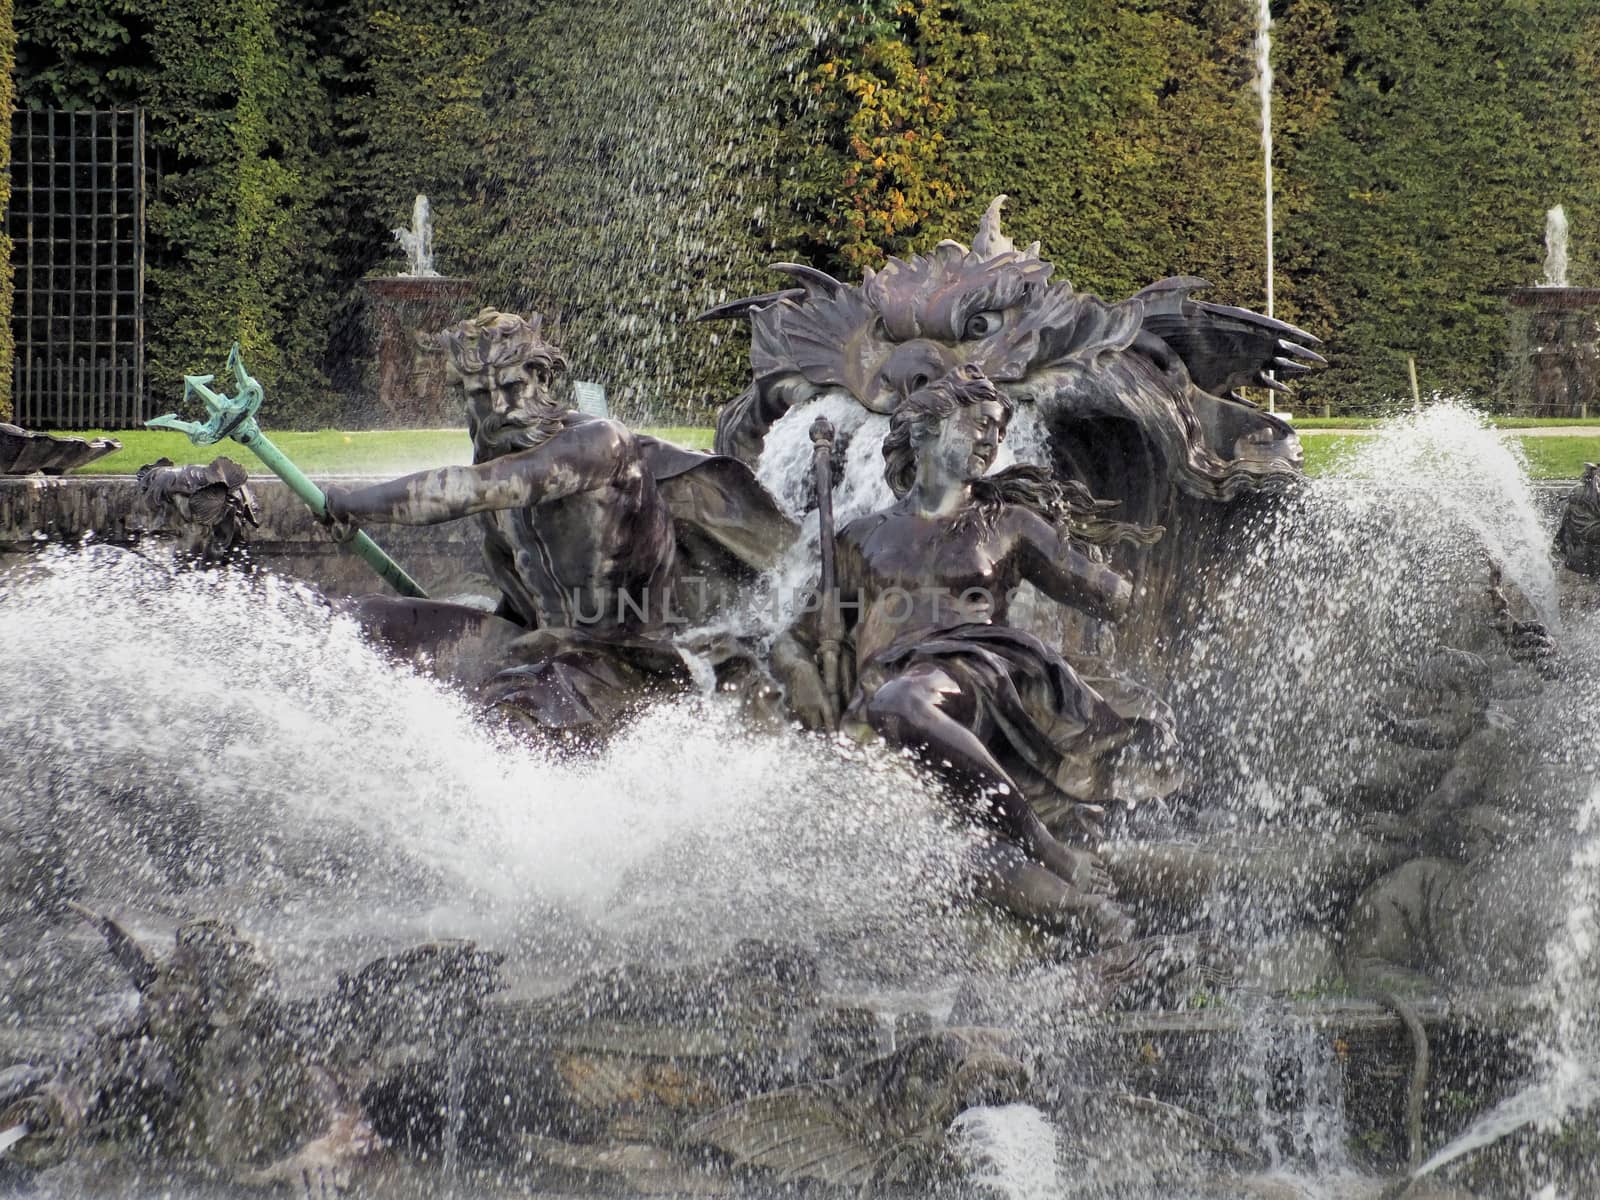 The Neptune fountain at Versailles was built between 1679 and 1681 and, in 1740, the sculptural decoration was installed. The new fountain, which features ninety-nine water effects that compose an extraordinary aquatic spectacle, was officially opened by Louis XV